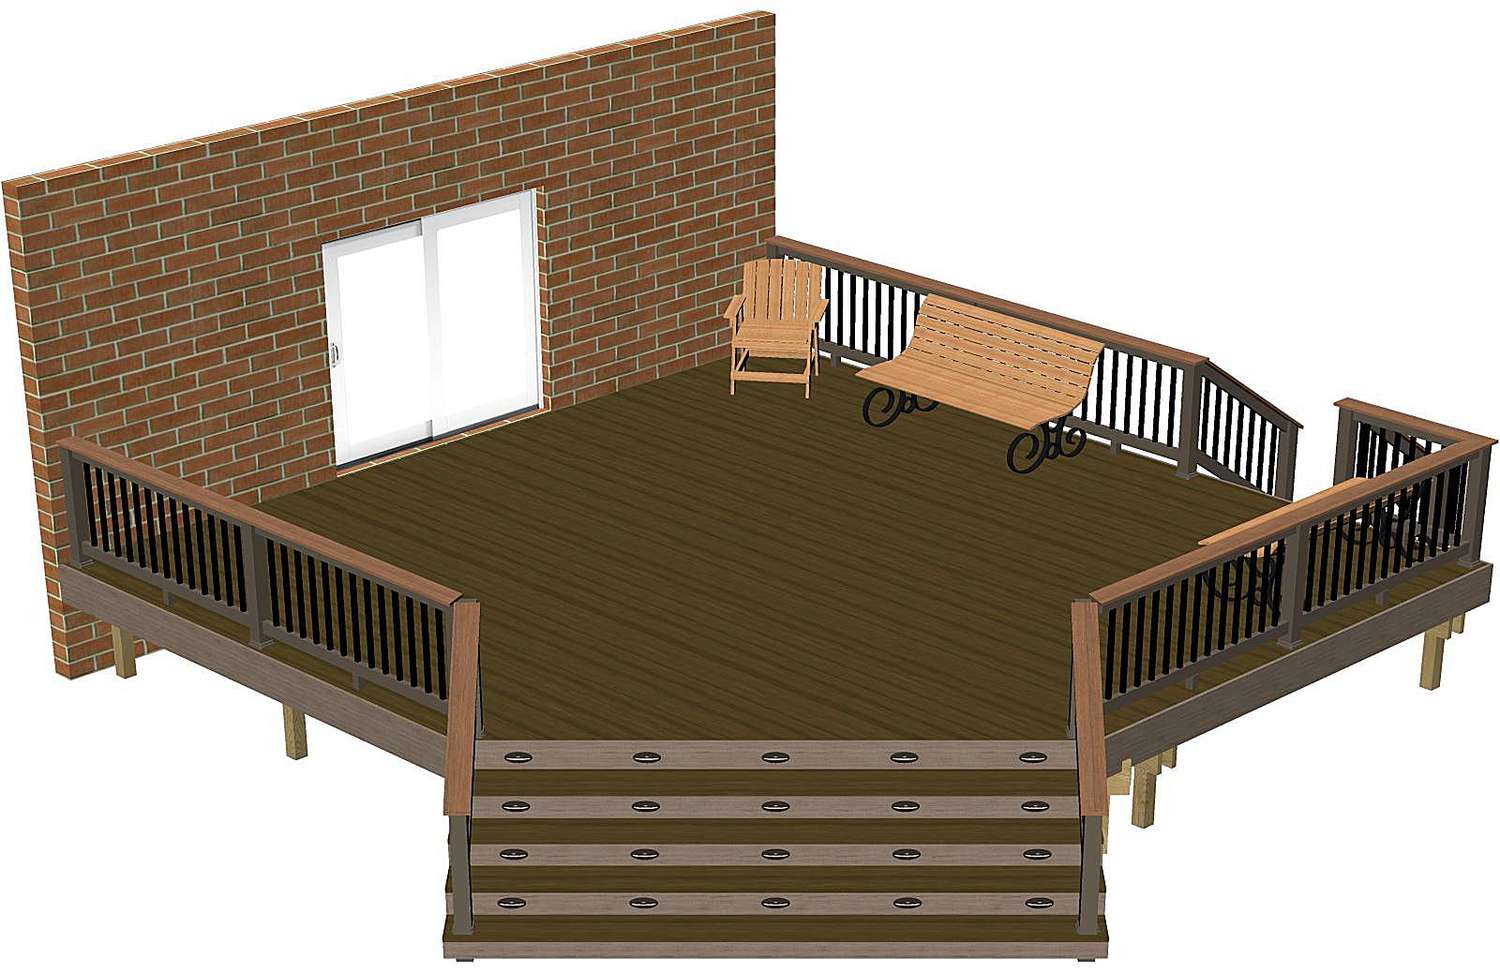 A rendering of a deck.